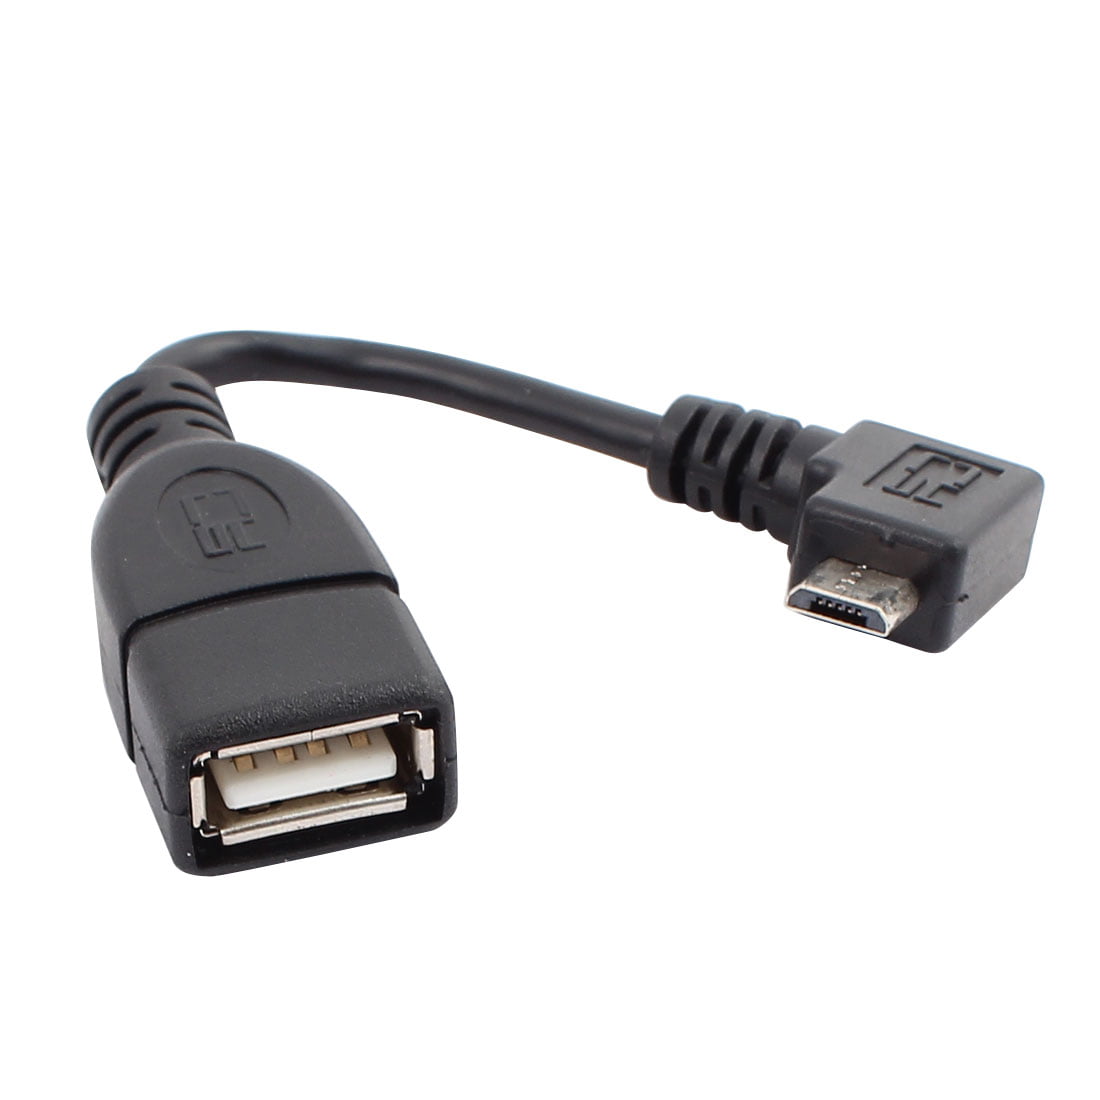 1x 90 Degree Up Angle  USB 5-Pin B Male to USB 2.0 A Female OTG Host Adapter 